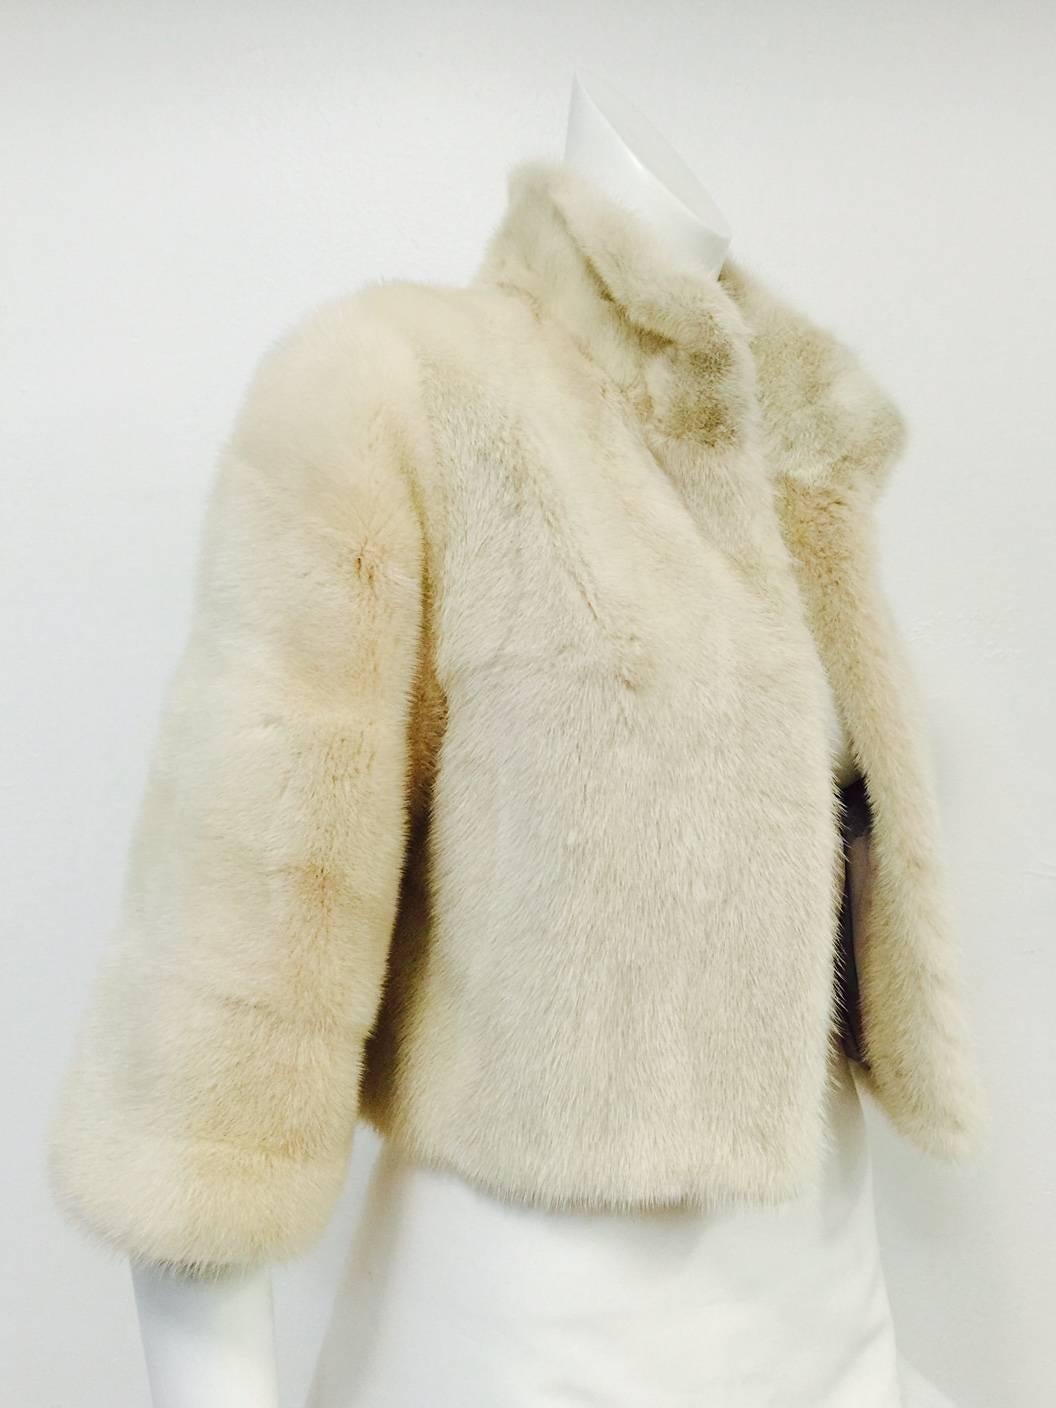 Somper Furs  Beverly HIlls Diamond Jubilee Pearl Mink Jacket honors 75 years of one of the world's most celebrated addresses!  Features ultra-luxurious mink in a most perfect pearl color, cropped, swing silhouette and bracelet sleeves.  Fully lined